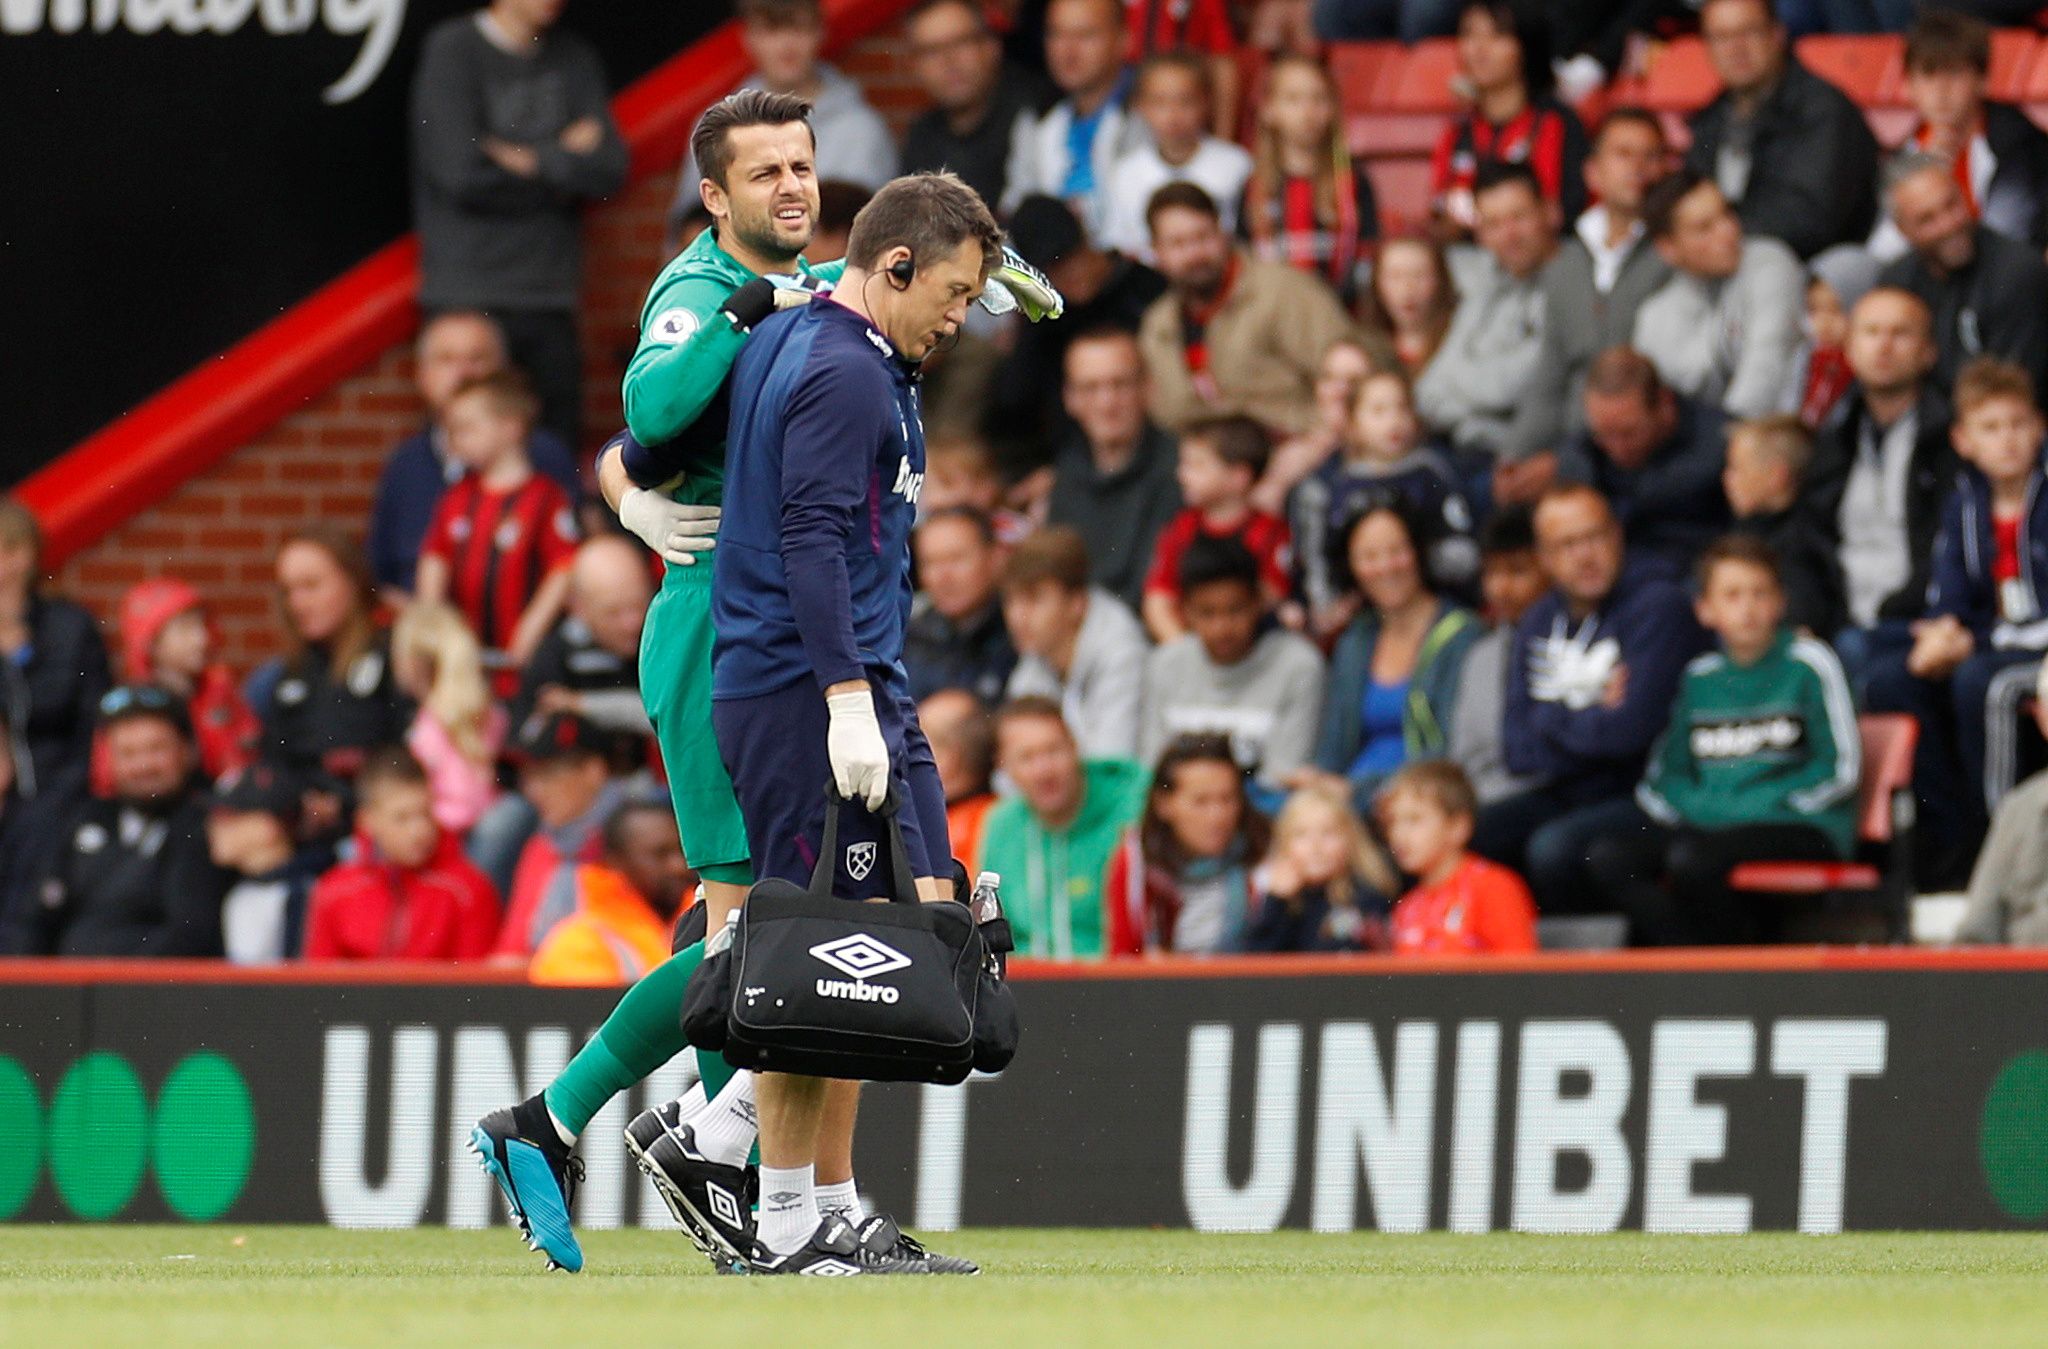 Soccer Football - Premier League - AFC Bournemouth v West Ham United - Vitality Stadium, Bournemouth, Britain - September 28, 2019  West Ham United's Lukasz Fabianski is helped off the pitch by medical staff after sustaining an injury   Action Images via Reuters/John Sibley  EDITORIAL USE ONLY. No use with unauthorized audio, video, data, fixture lists, club/league logos or "live" services. Online in-match use limited to 75 images, no video emulation. No use in betting, games or single club/leag